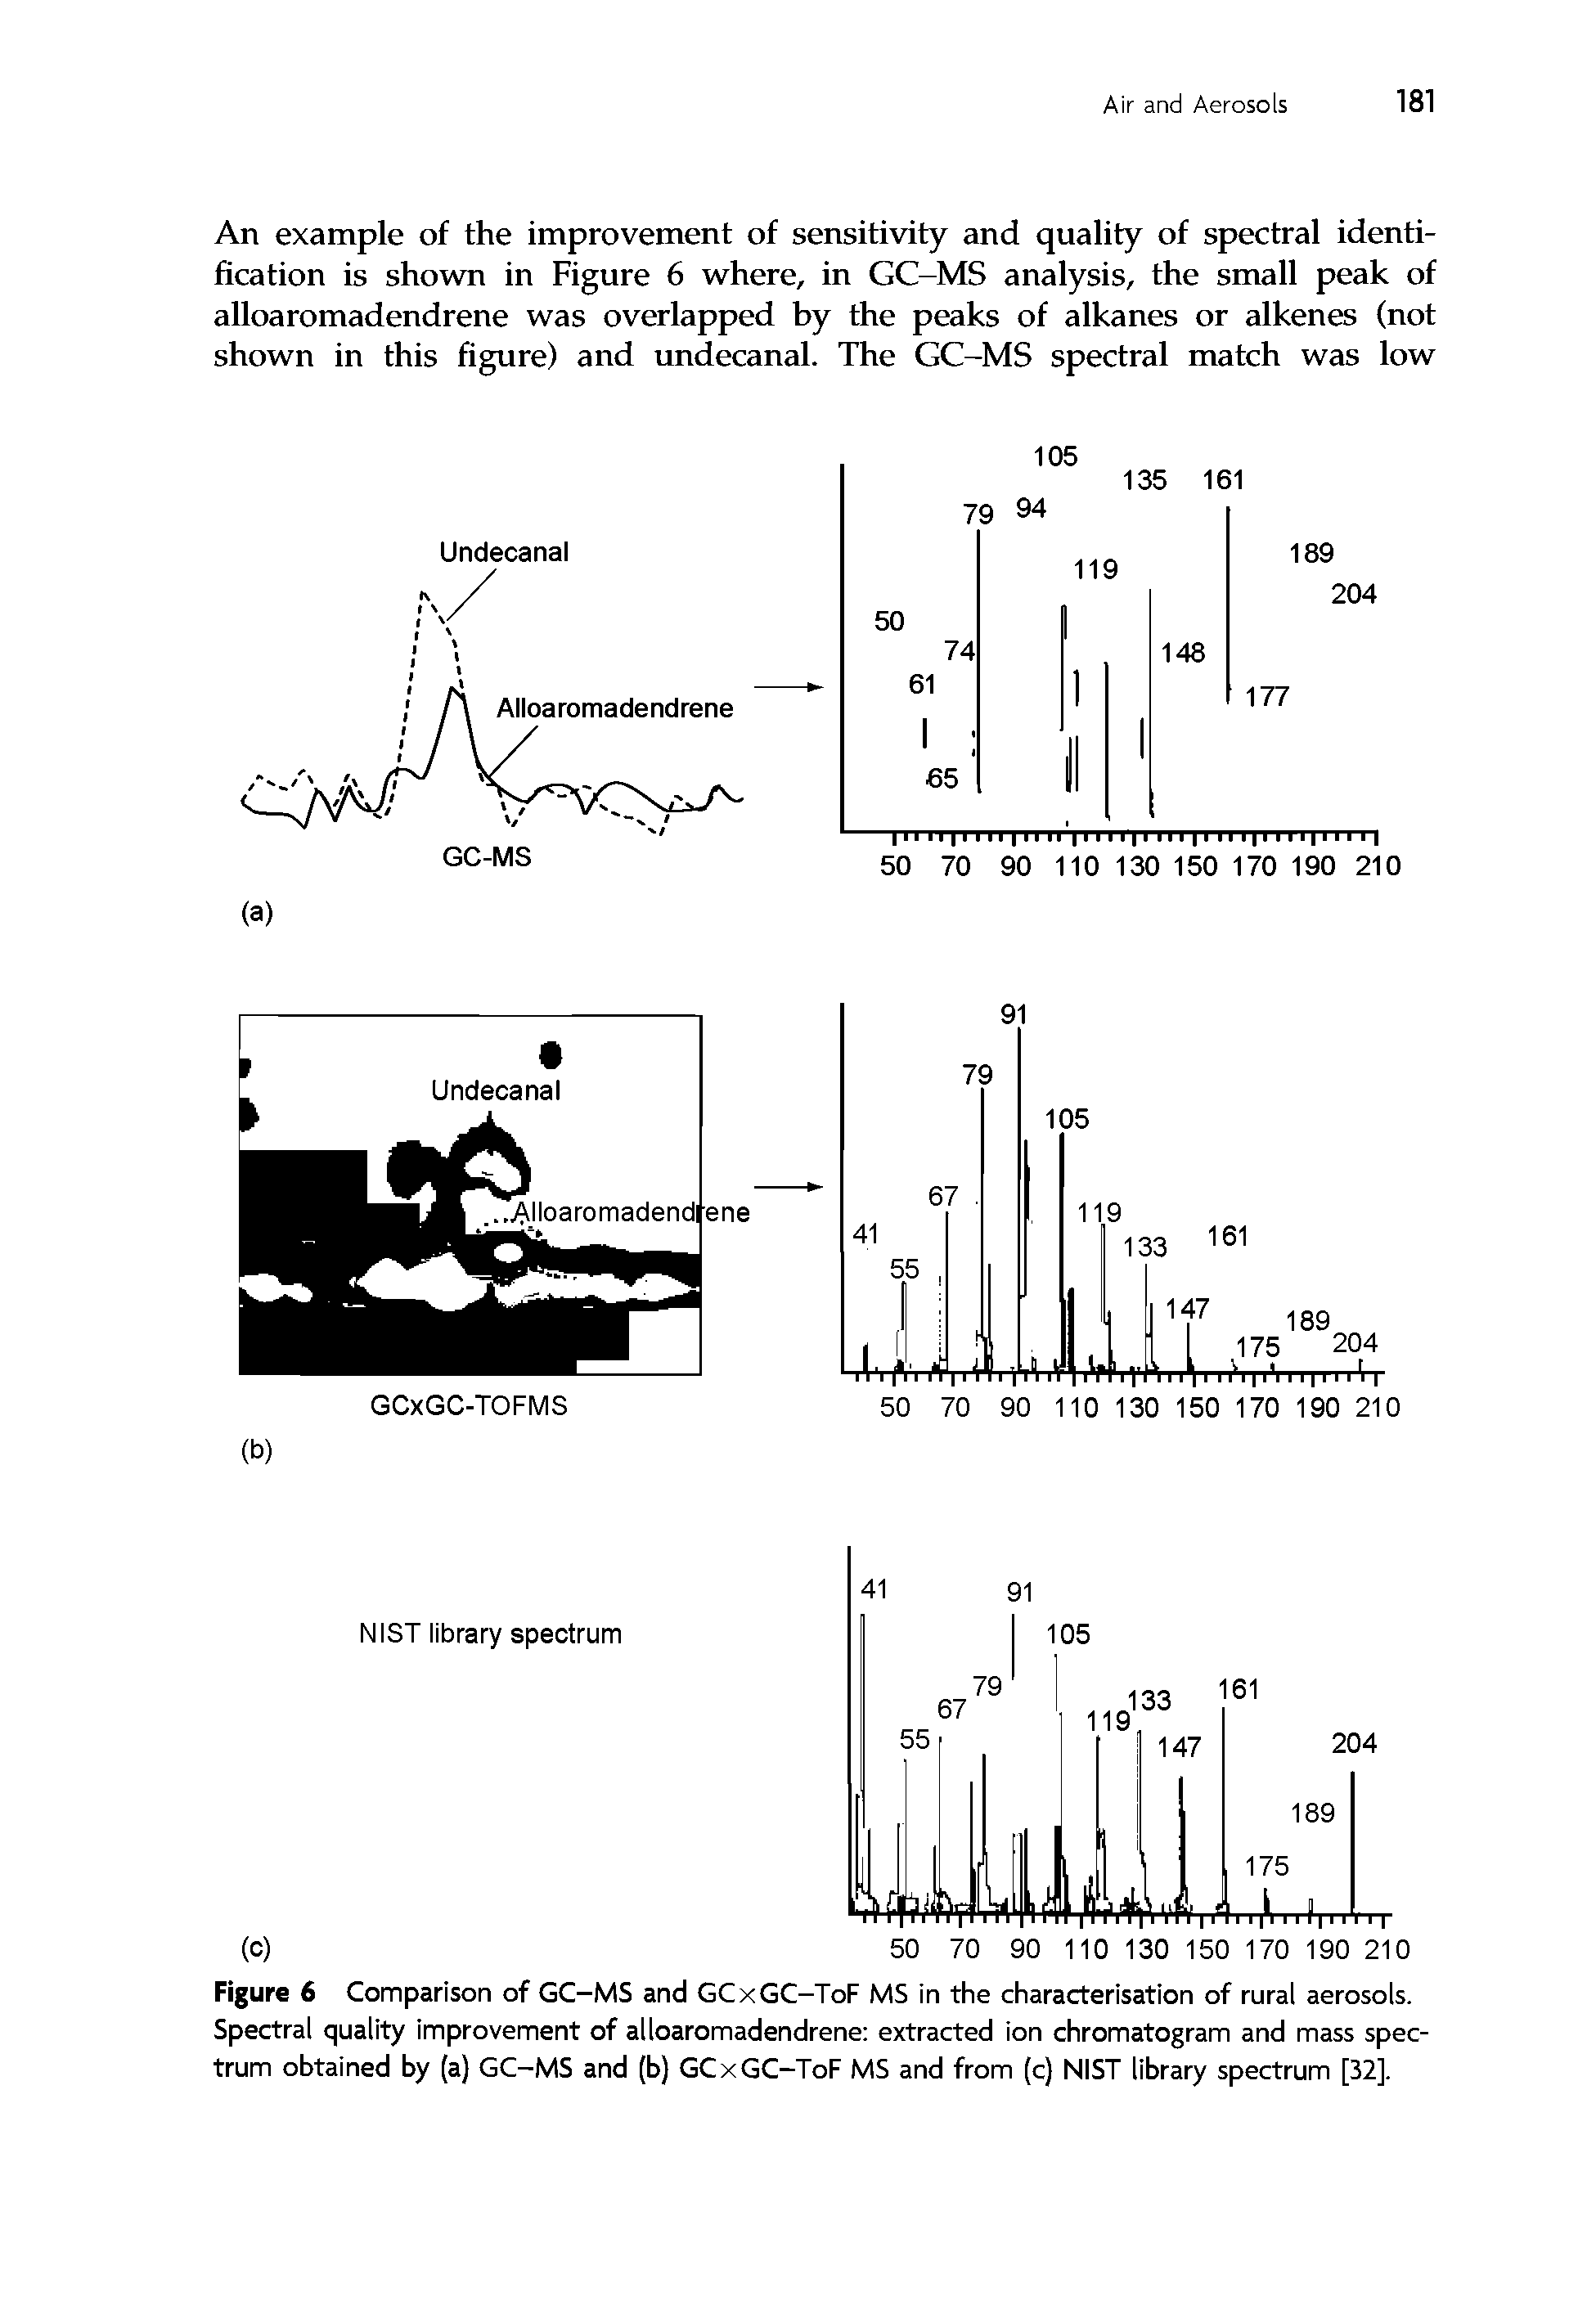 Figure 6 Comparison of GC-MS and GCxGC-ToF MS in the characterisation of rural aerosols. Spectral quality improvement of alloaromadendrene extracted ion chromatogram and mass spectrum obtained by (a) GC-MS and (b) GCxGC-ToF MS and from (c) NIST library spectrum [32].